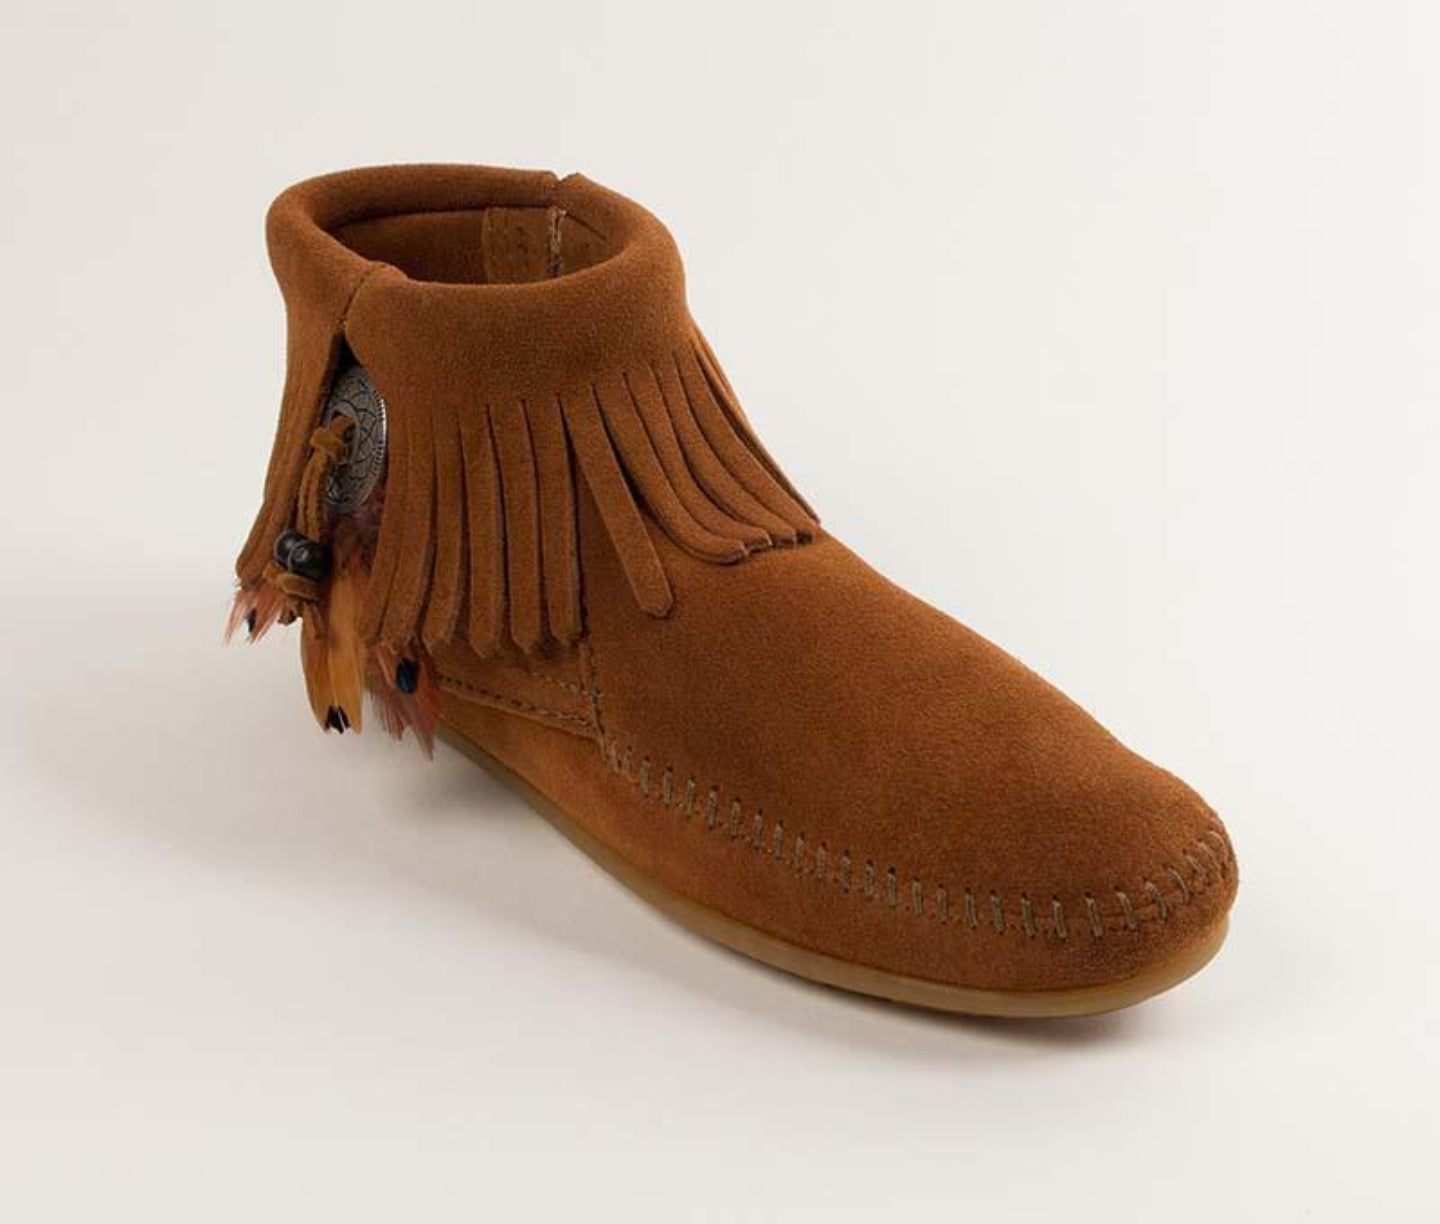 Concho Feather Boot in Brown from 3/4 Angle View